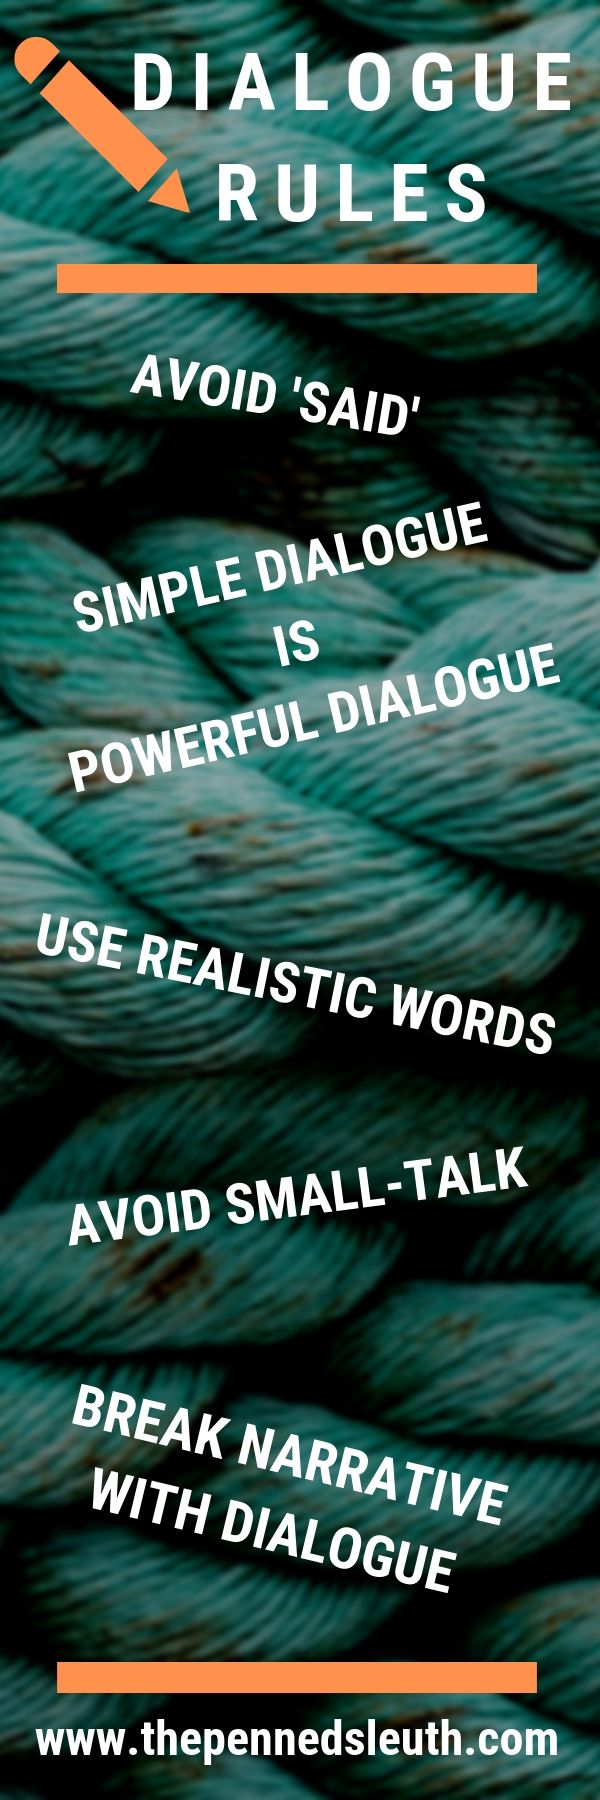 15 Writing Rules That Will Improve Your Dialogue, The Penned Sleuth, Matthew Dewey Writer, Dialogue is a wonderful essential for any book with speaking characters. Yet, it is easy to write mediocre dialogue. Here are 15 rules that ensure your next dialogue serves its purpose and has an impact on the reader.